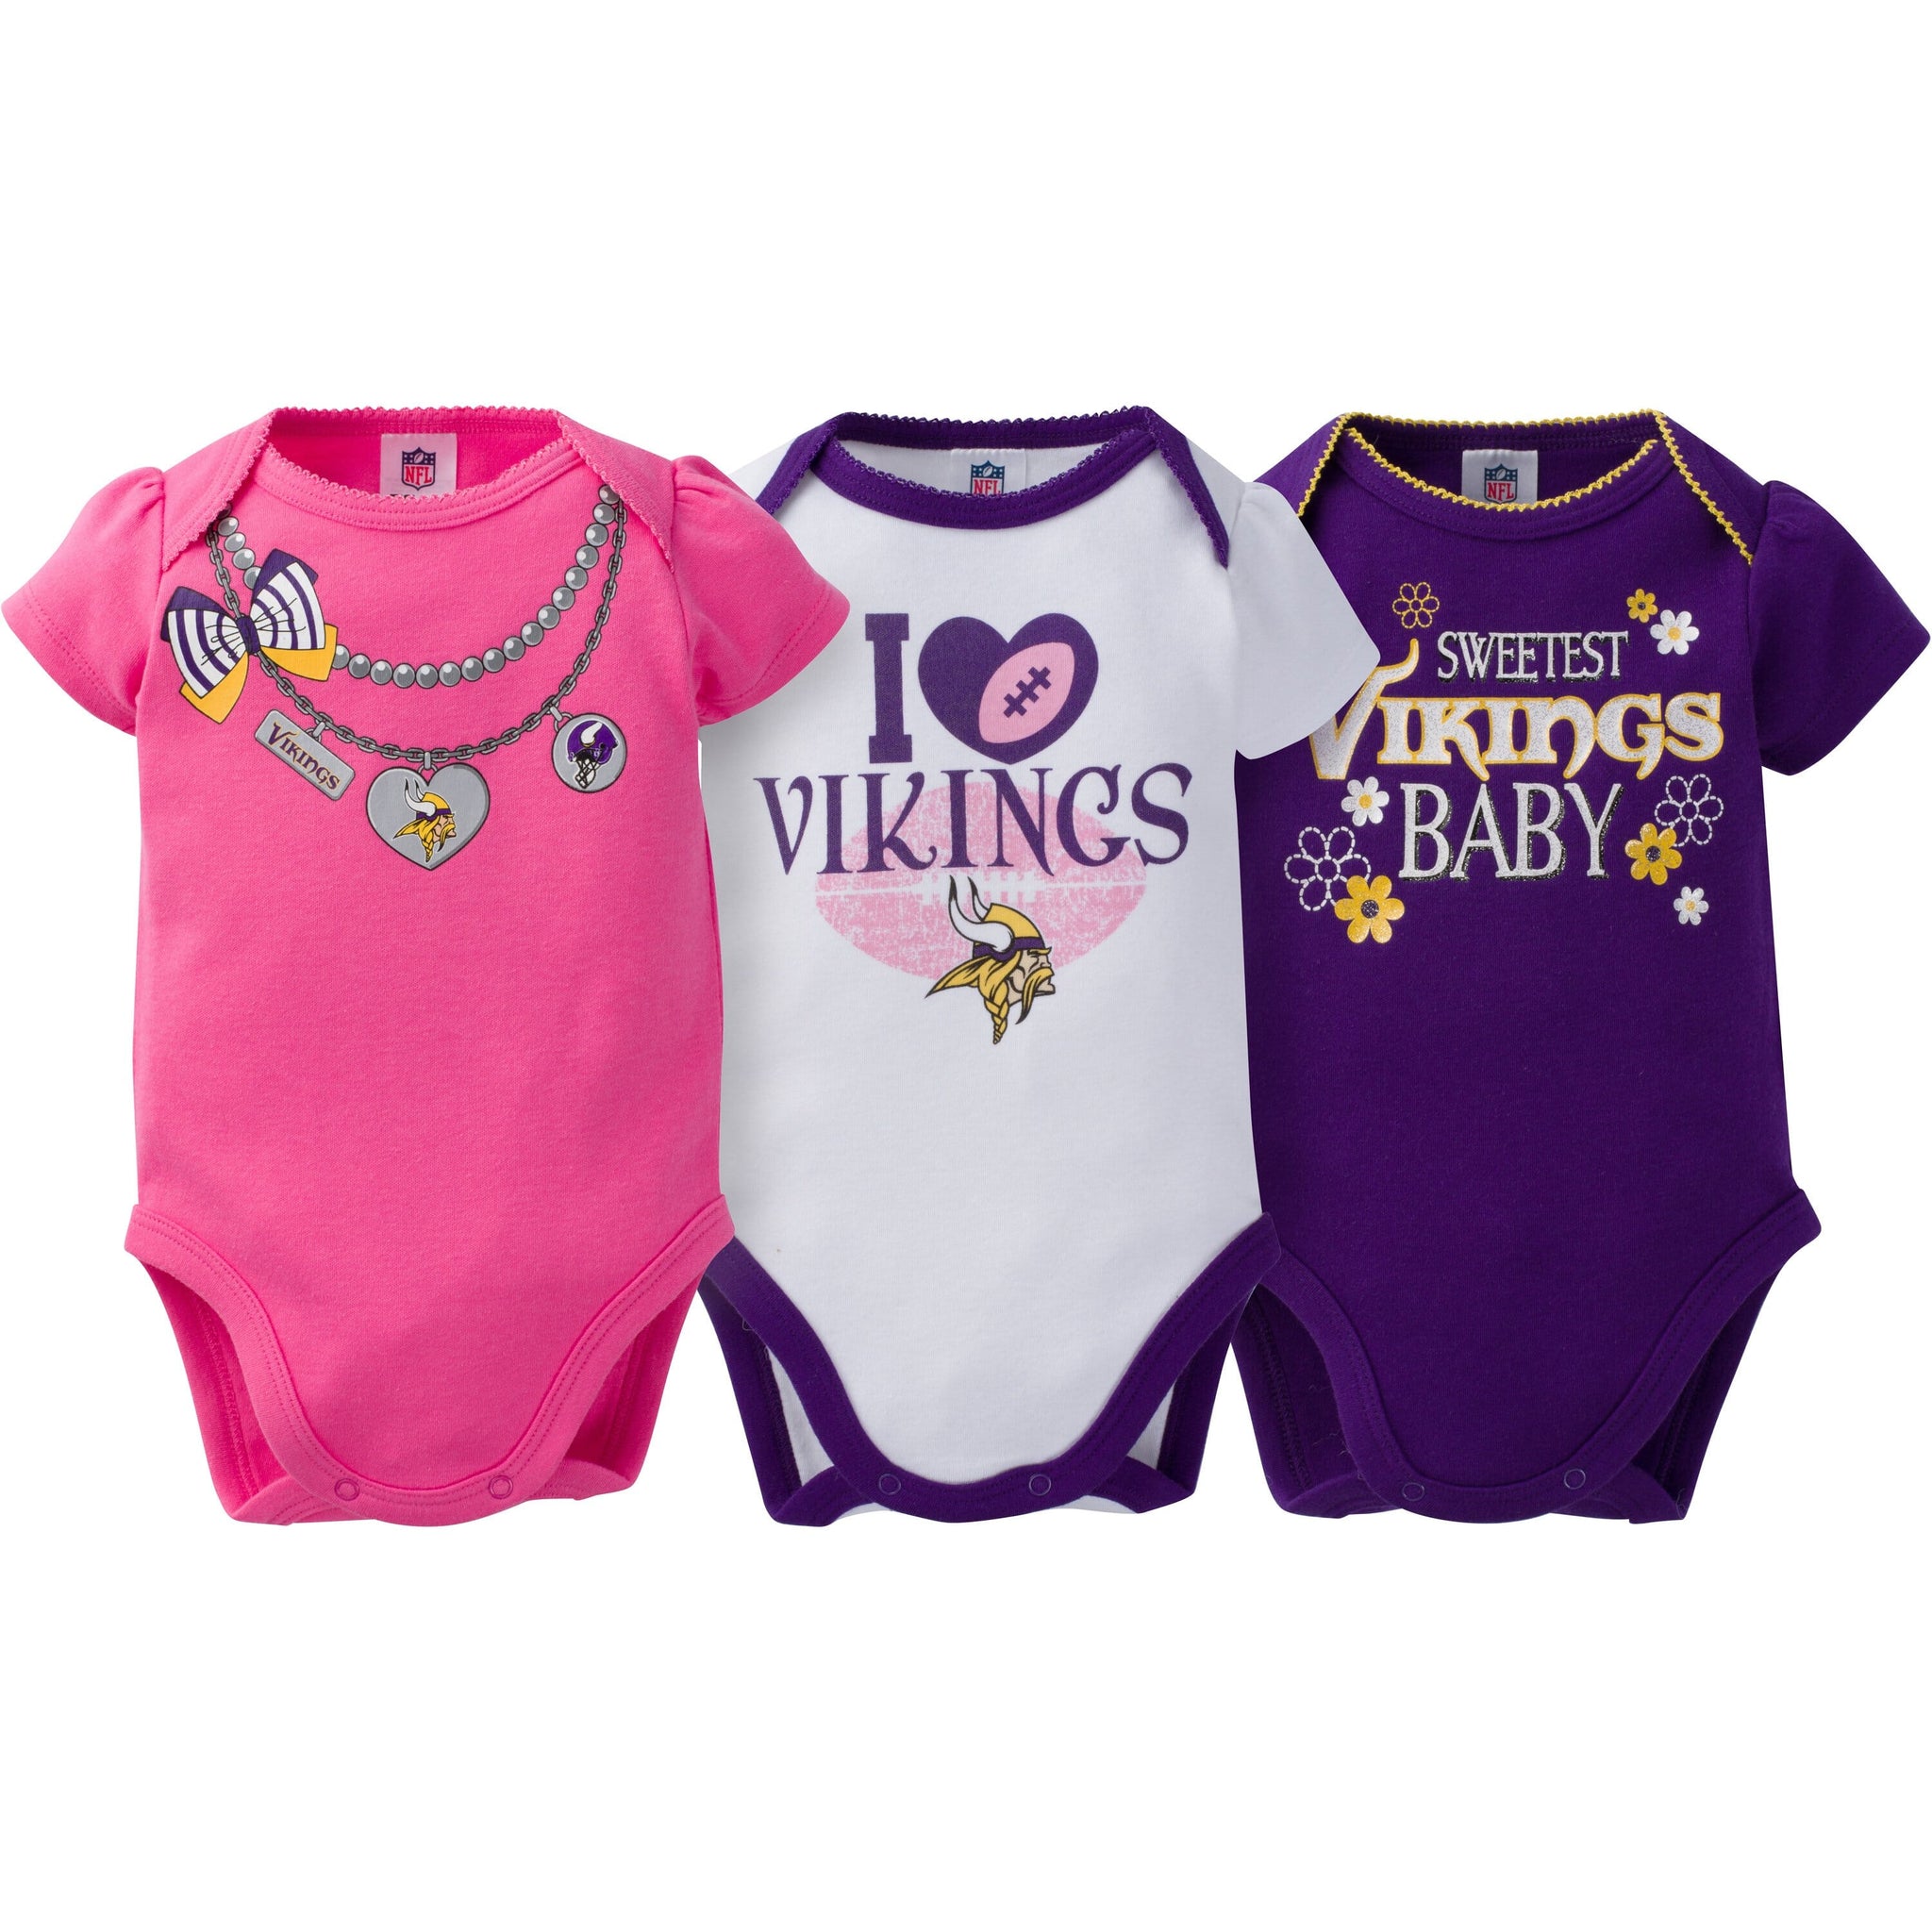 nfl vikings baby clothes